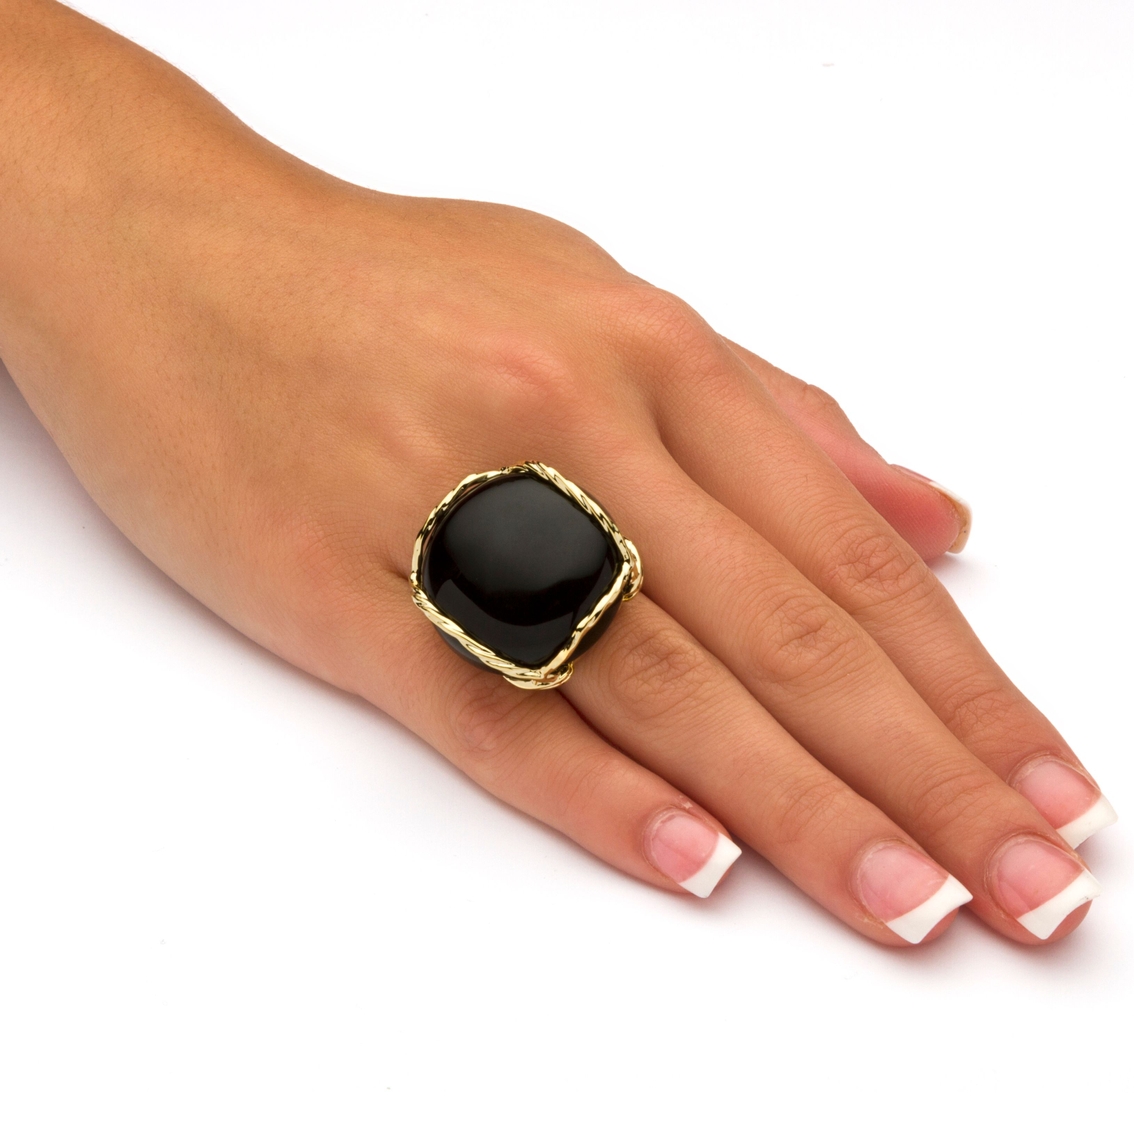 Genuine Black Onyx Gold-Plated Cabochon Pillow Ring - Image 3 of 5